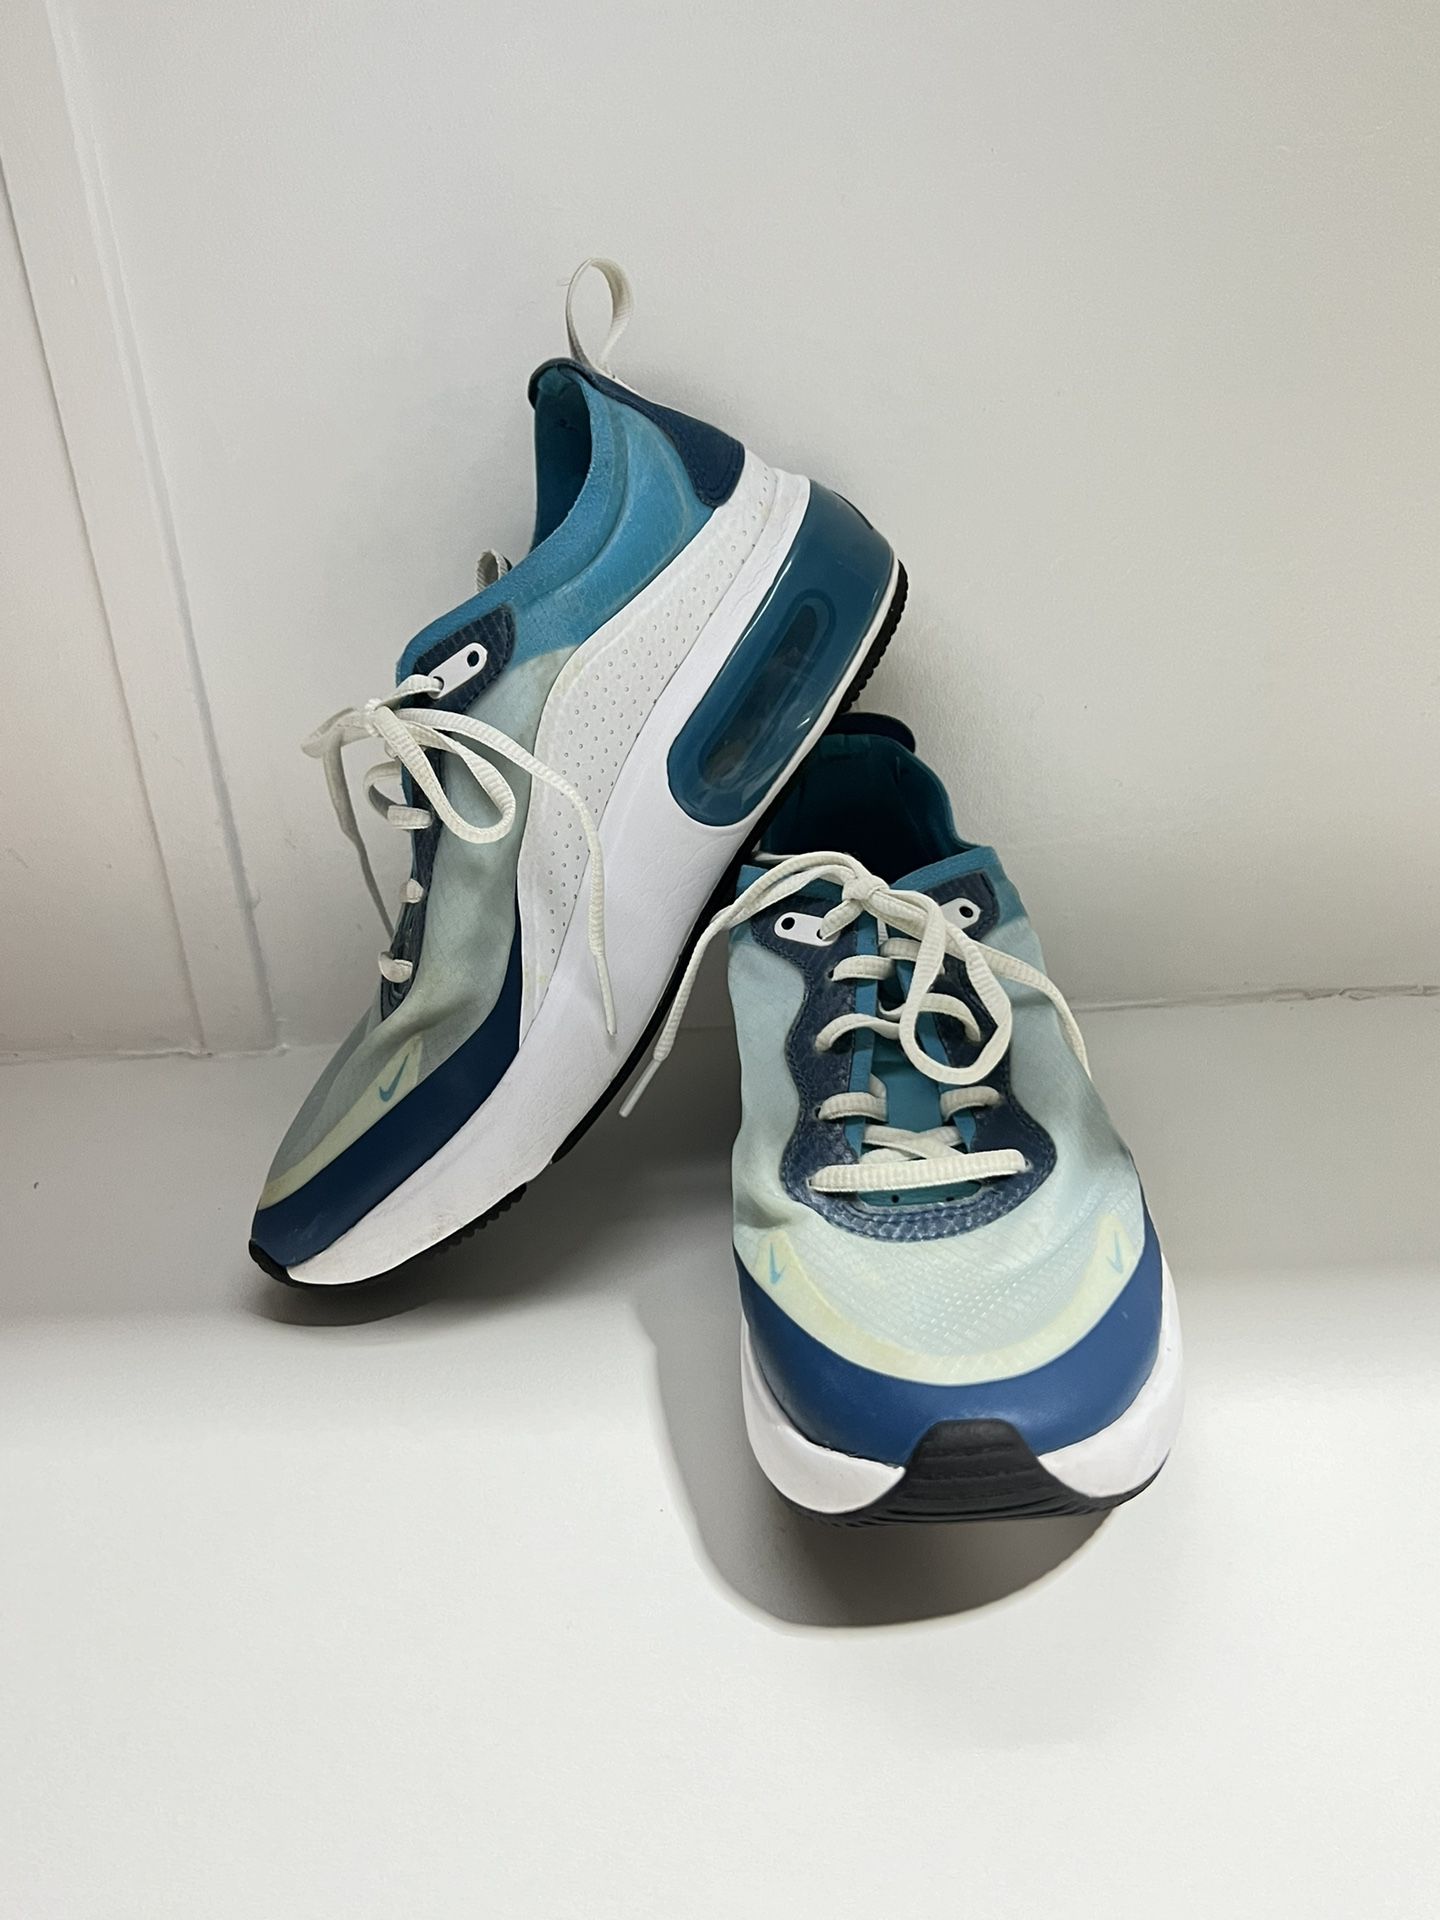 Nike Air Max Dia Womens Running Trainers blue color Shoes Size 6.5